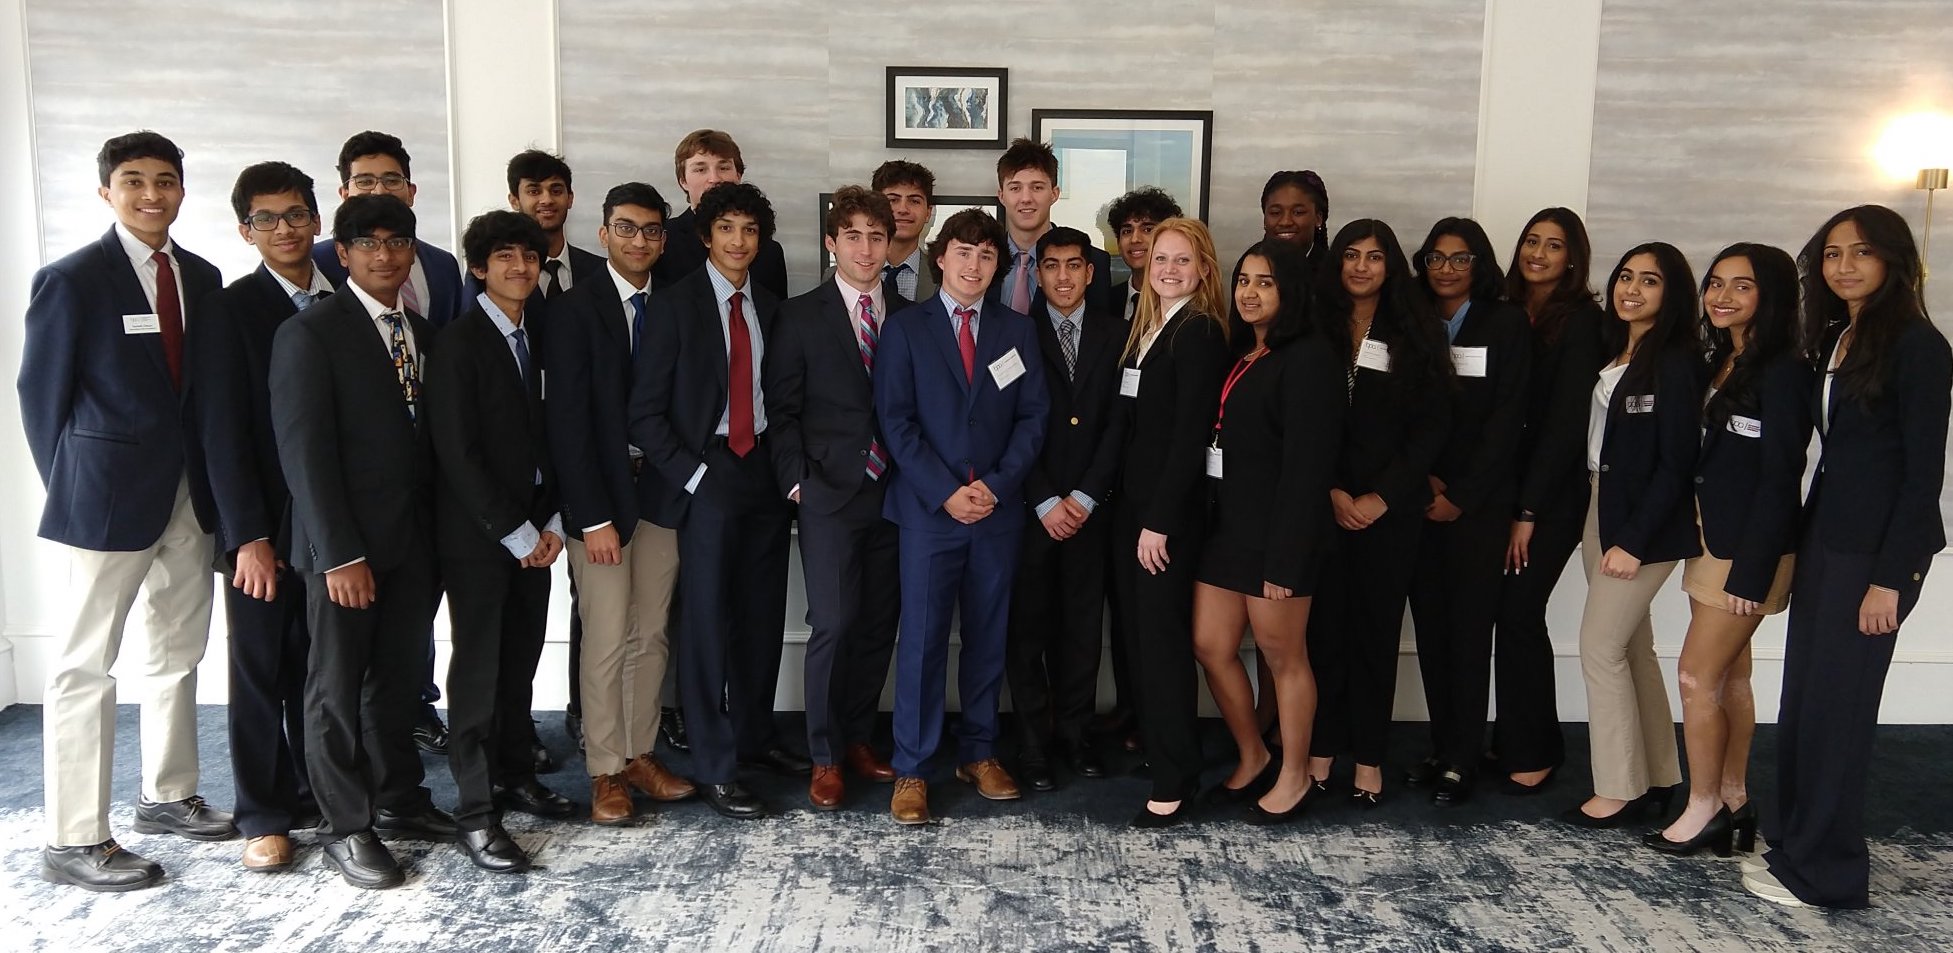 HHS Business Professionals of America students head to national competition